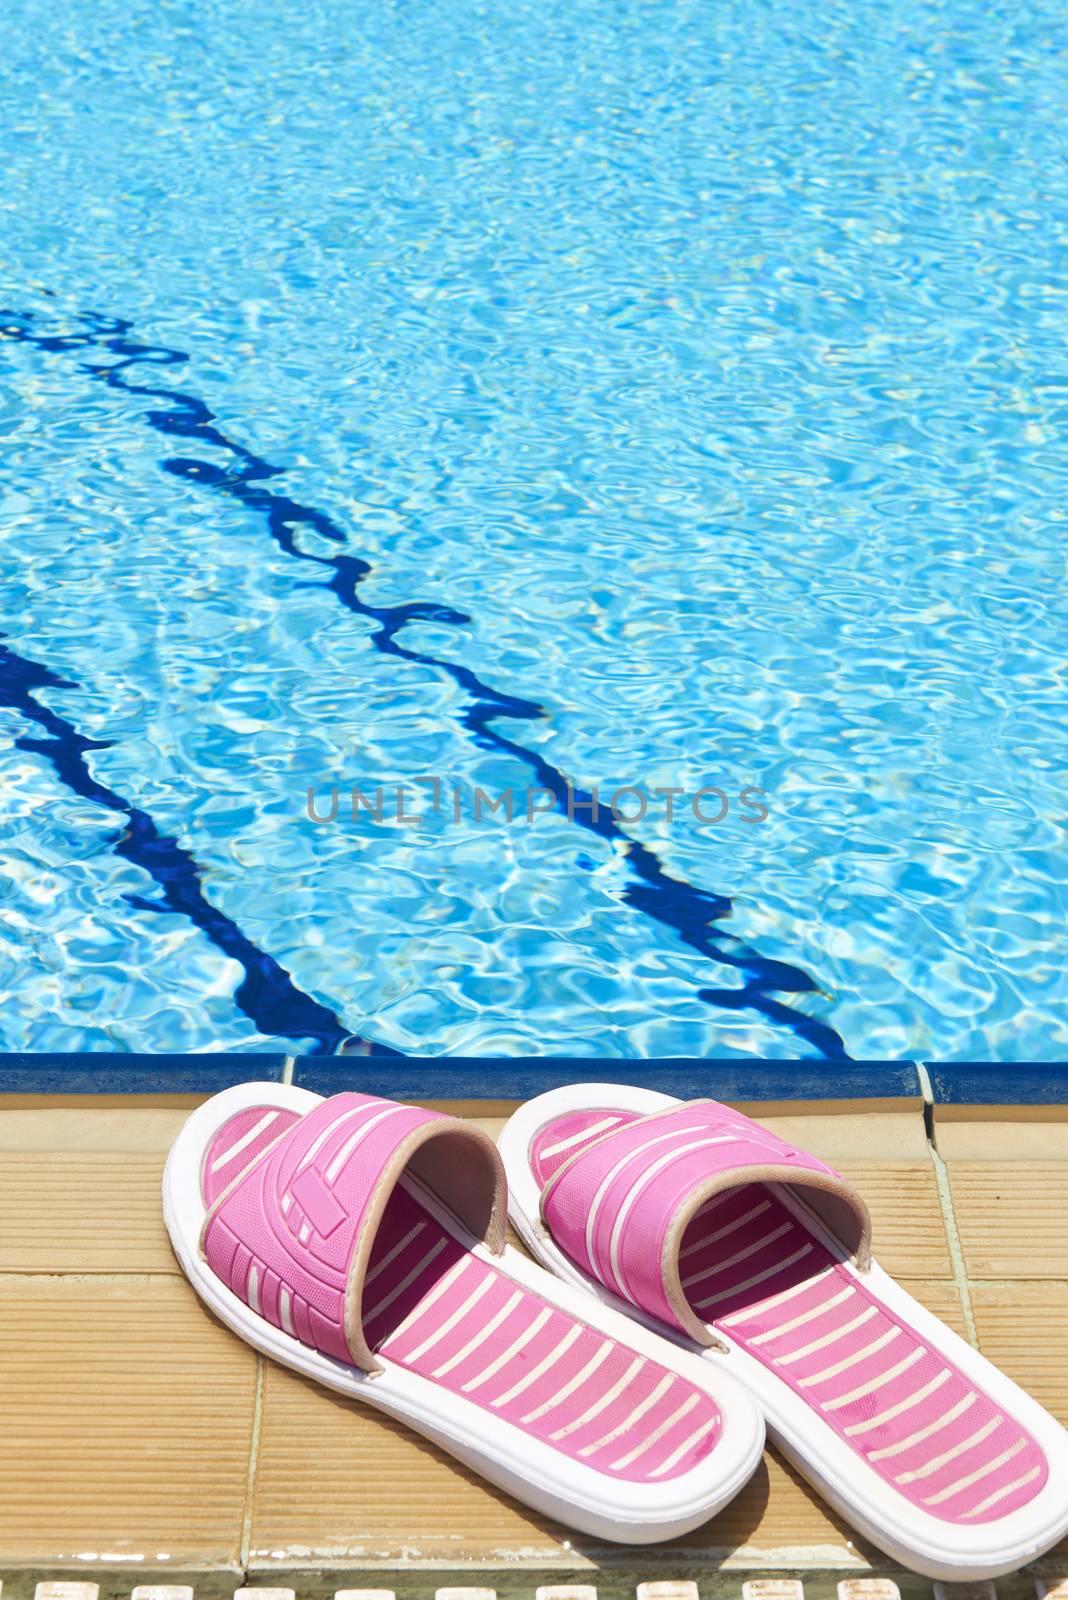 A pair of womens plastic sandals by side of swimming pool